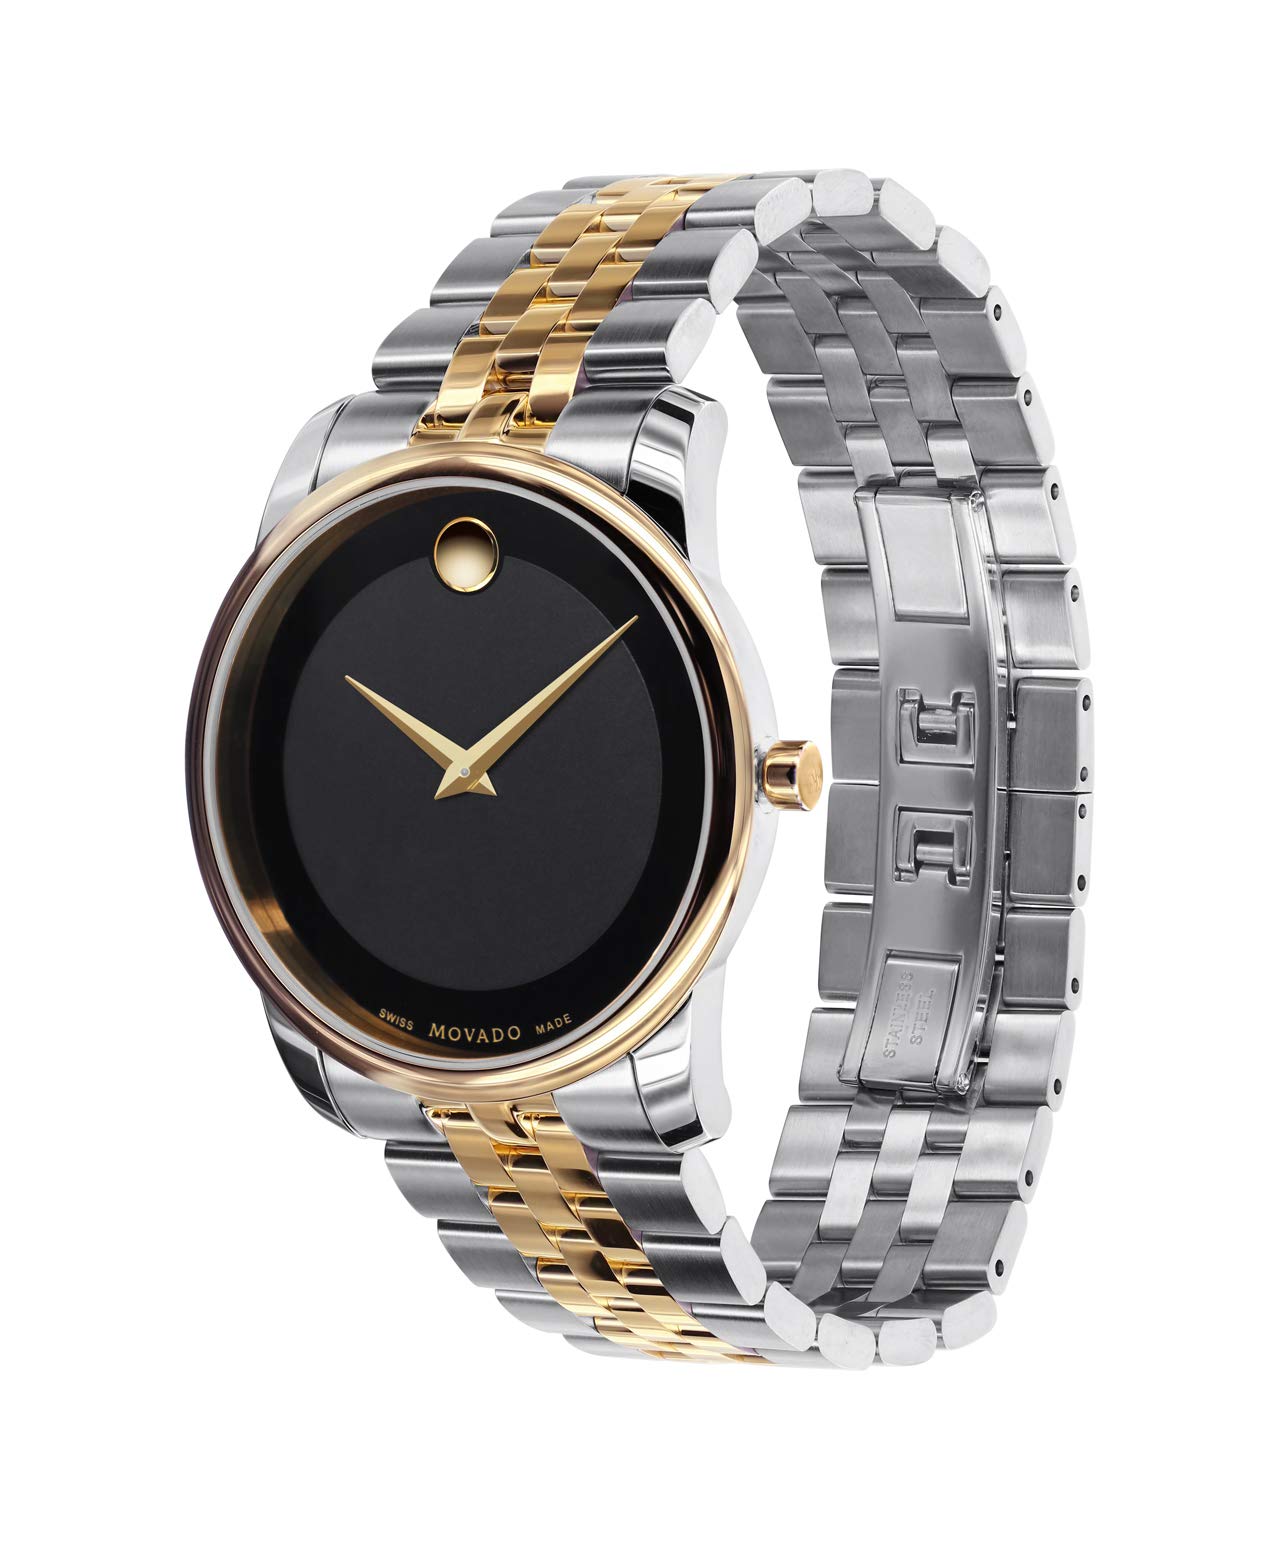 Movado Men's Museum Two Tone Watch with Concave Dot Museum Dial, Gold/Black & Brown Strap (606899)